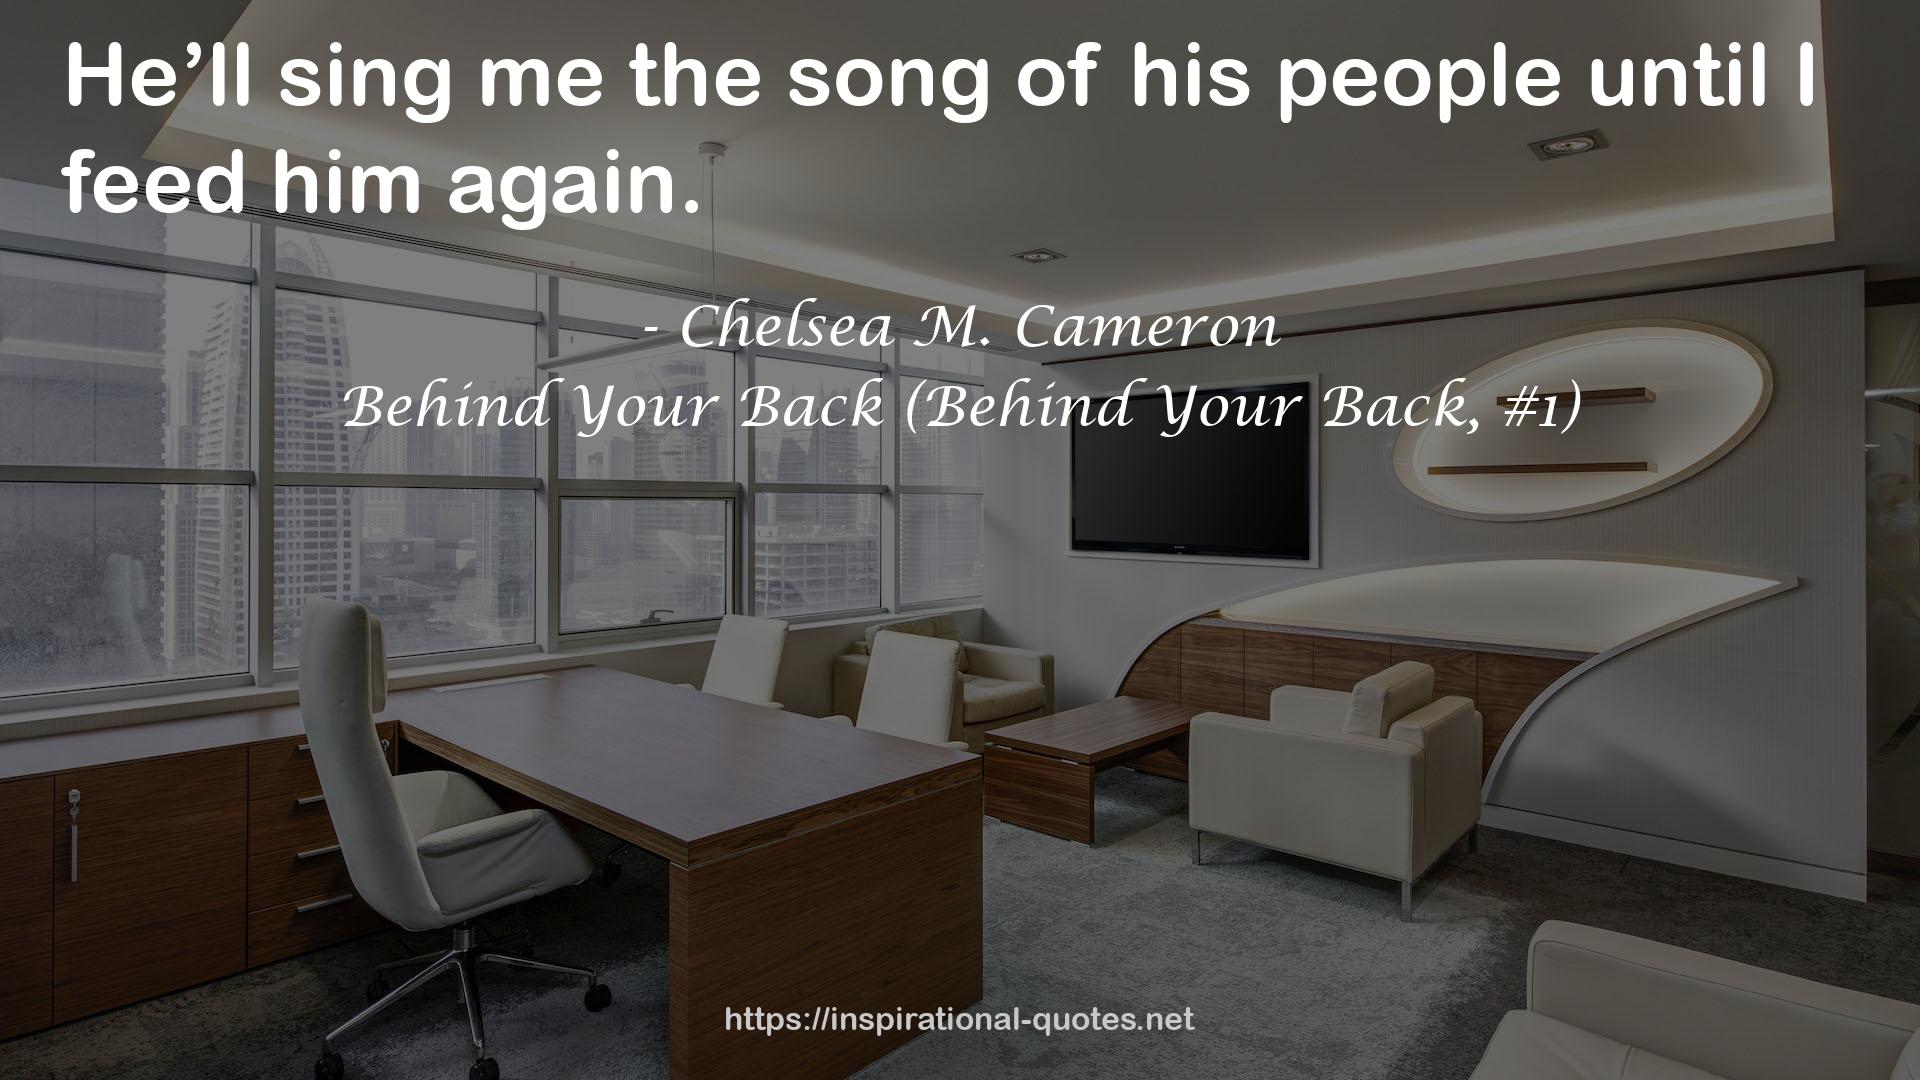 Behind Your Back (Behind Your Back, #1) QUOTES